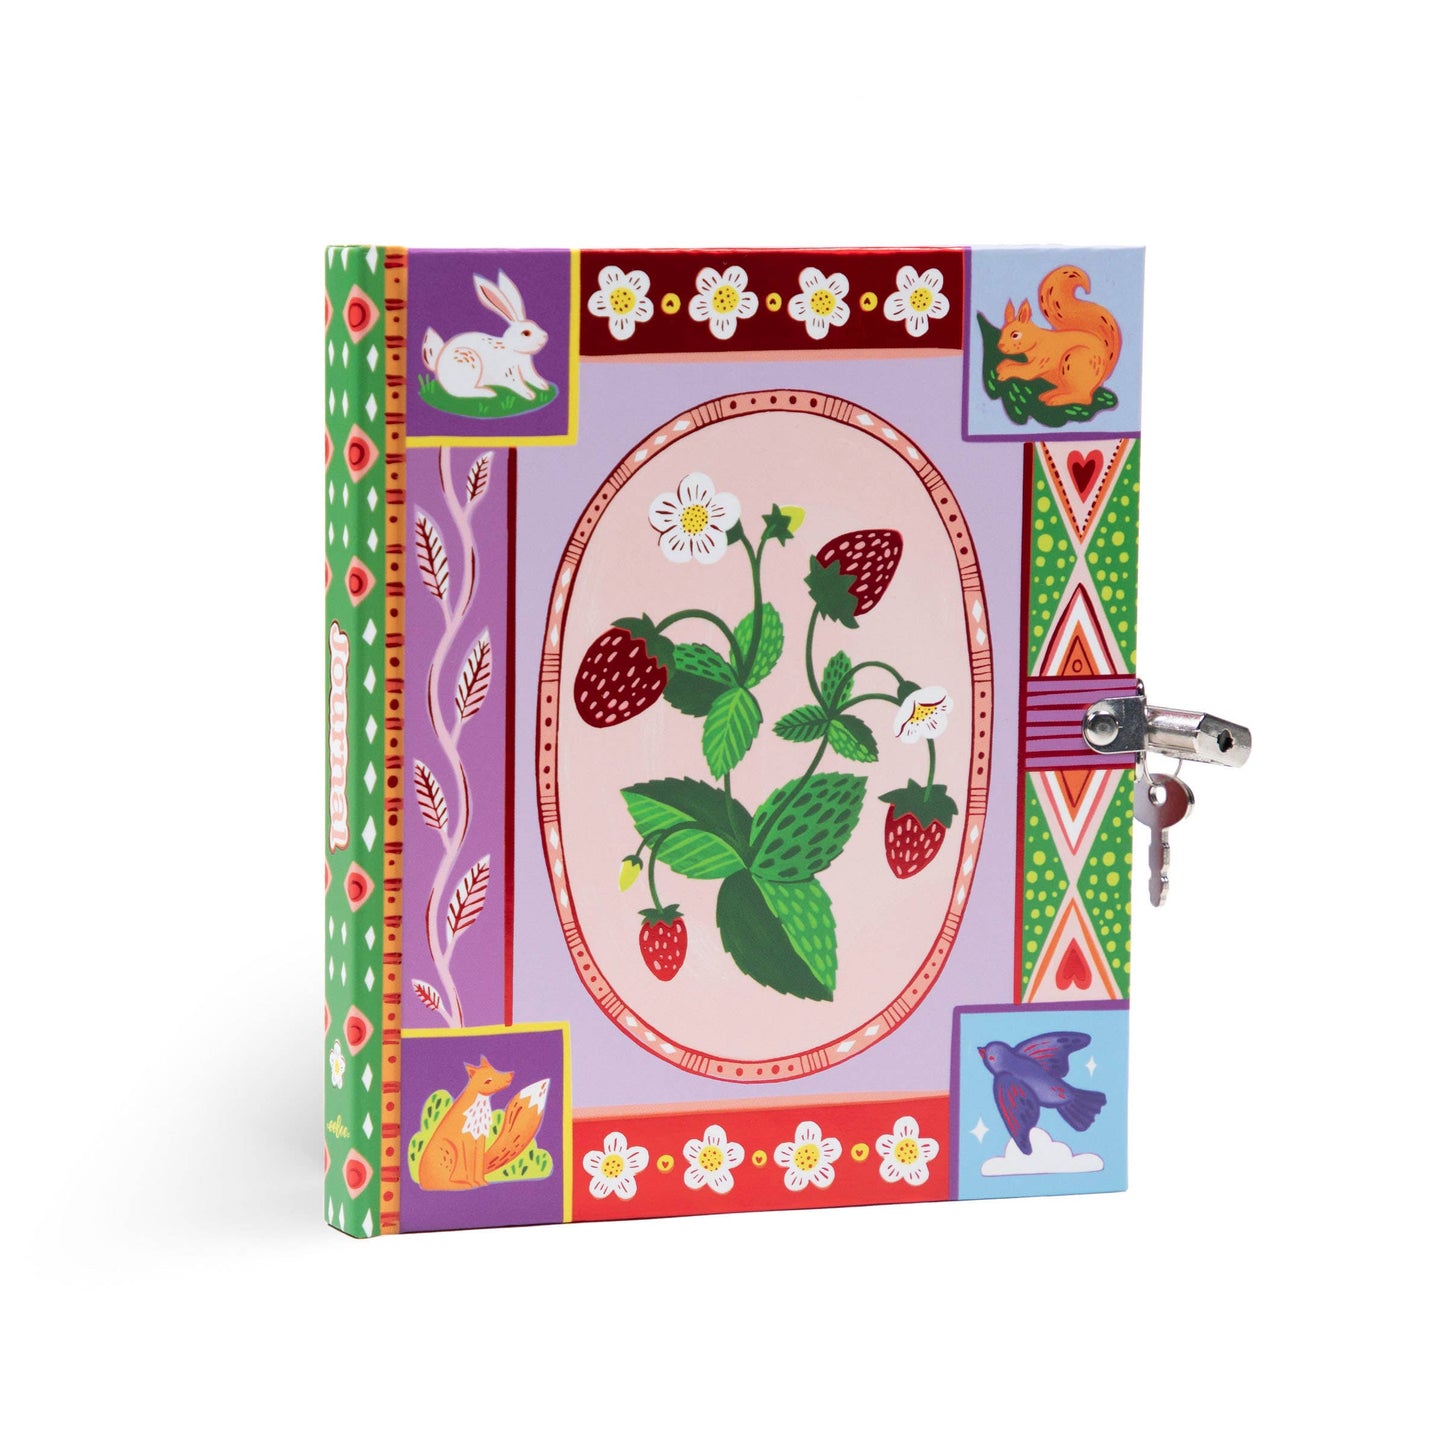 Strawberries Hardcover Journal With Lock & Key